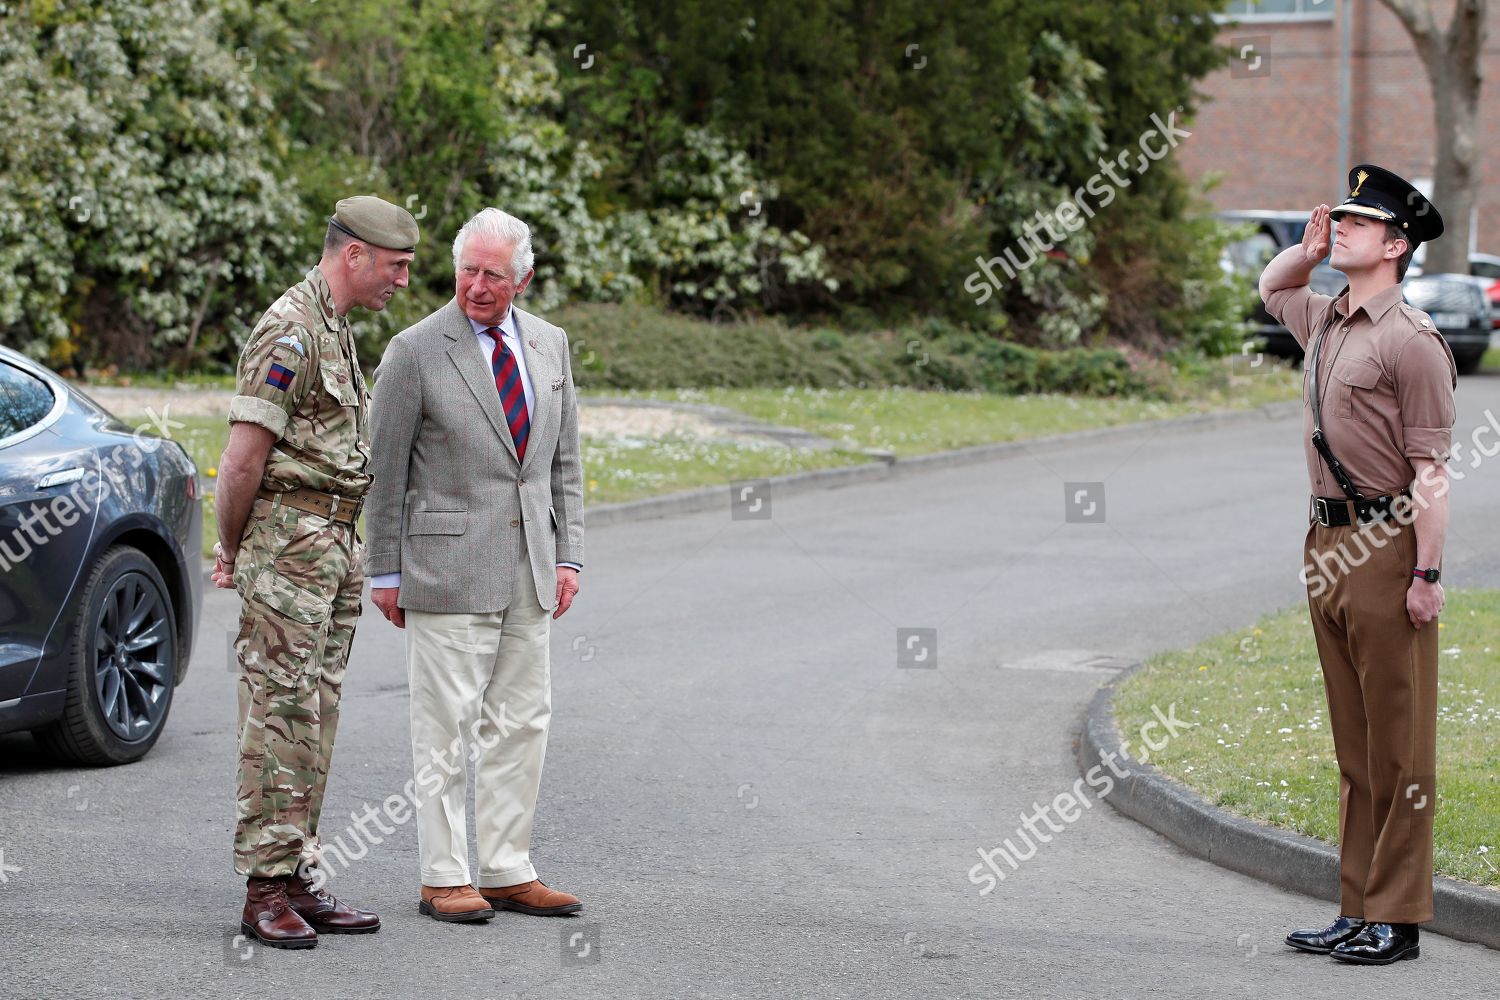 prince-charles-visits-members-of-the-welsh-guards-windsor-uk-shutterstock-editorial-11889775f.jpg